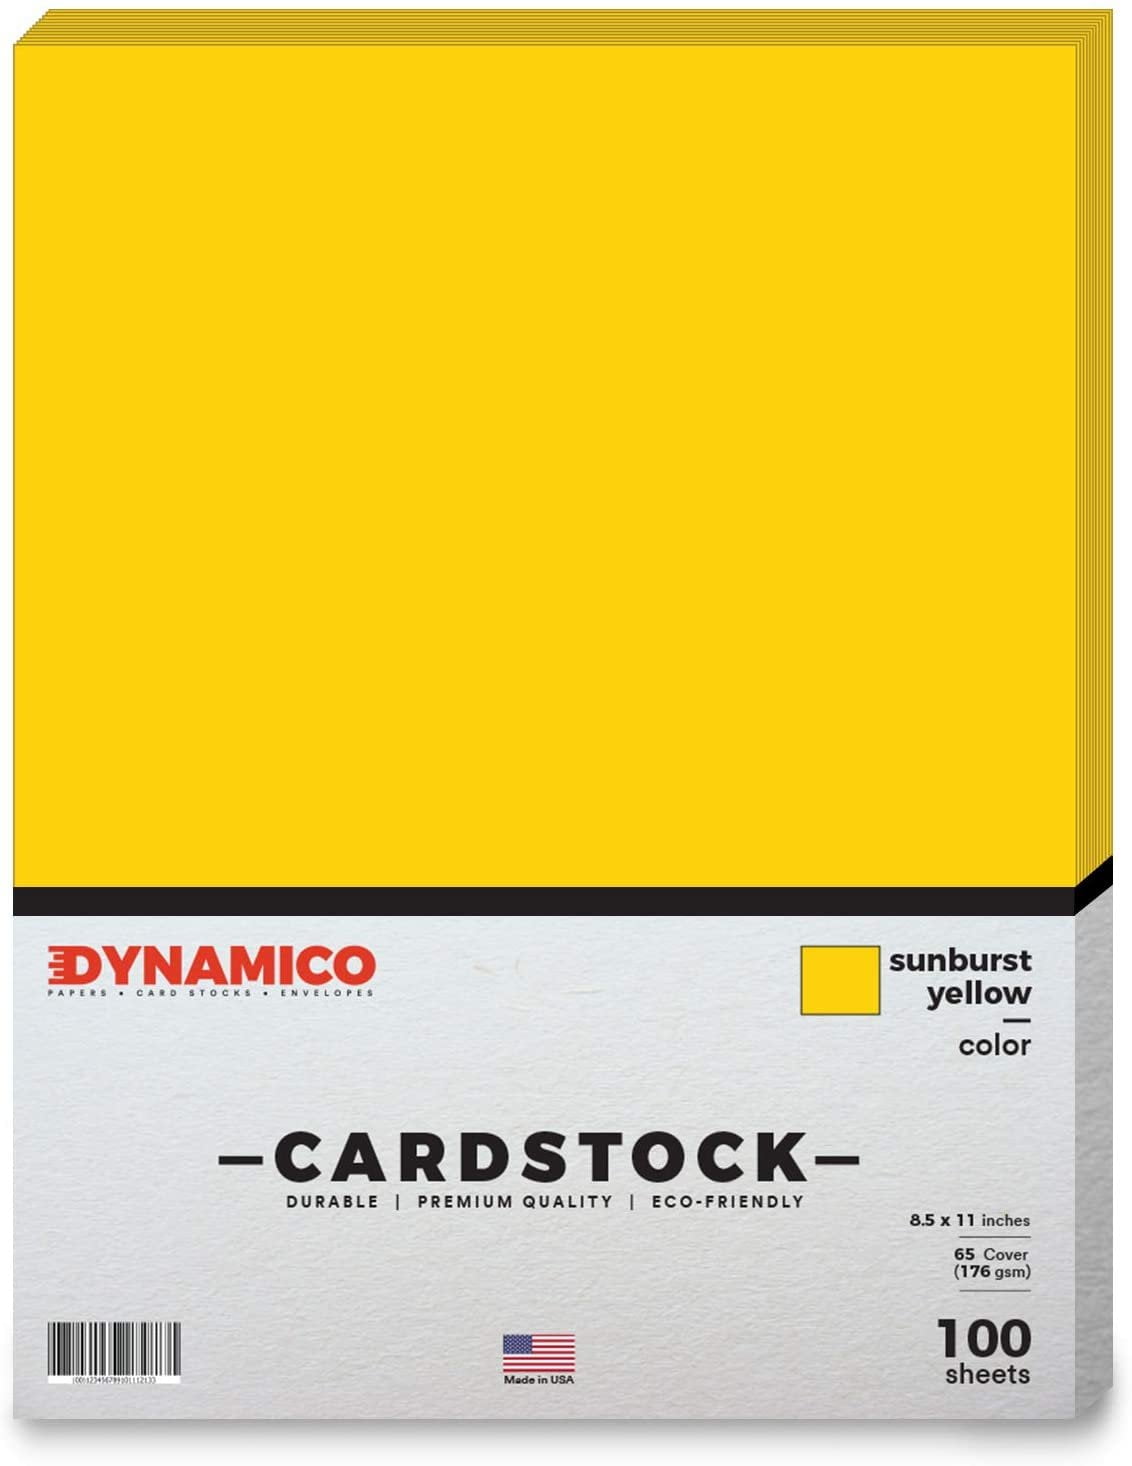 65 Cardstock Paper 8-1/2 x 11 250 Sheets Solar Yellow – King Stationary Inc